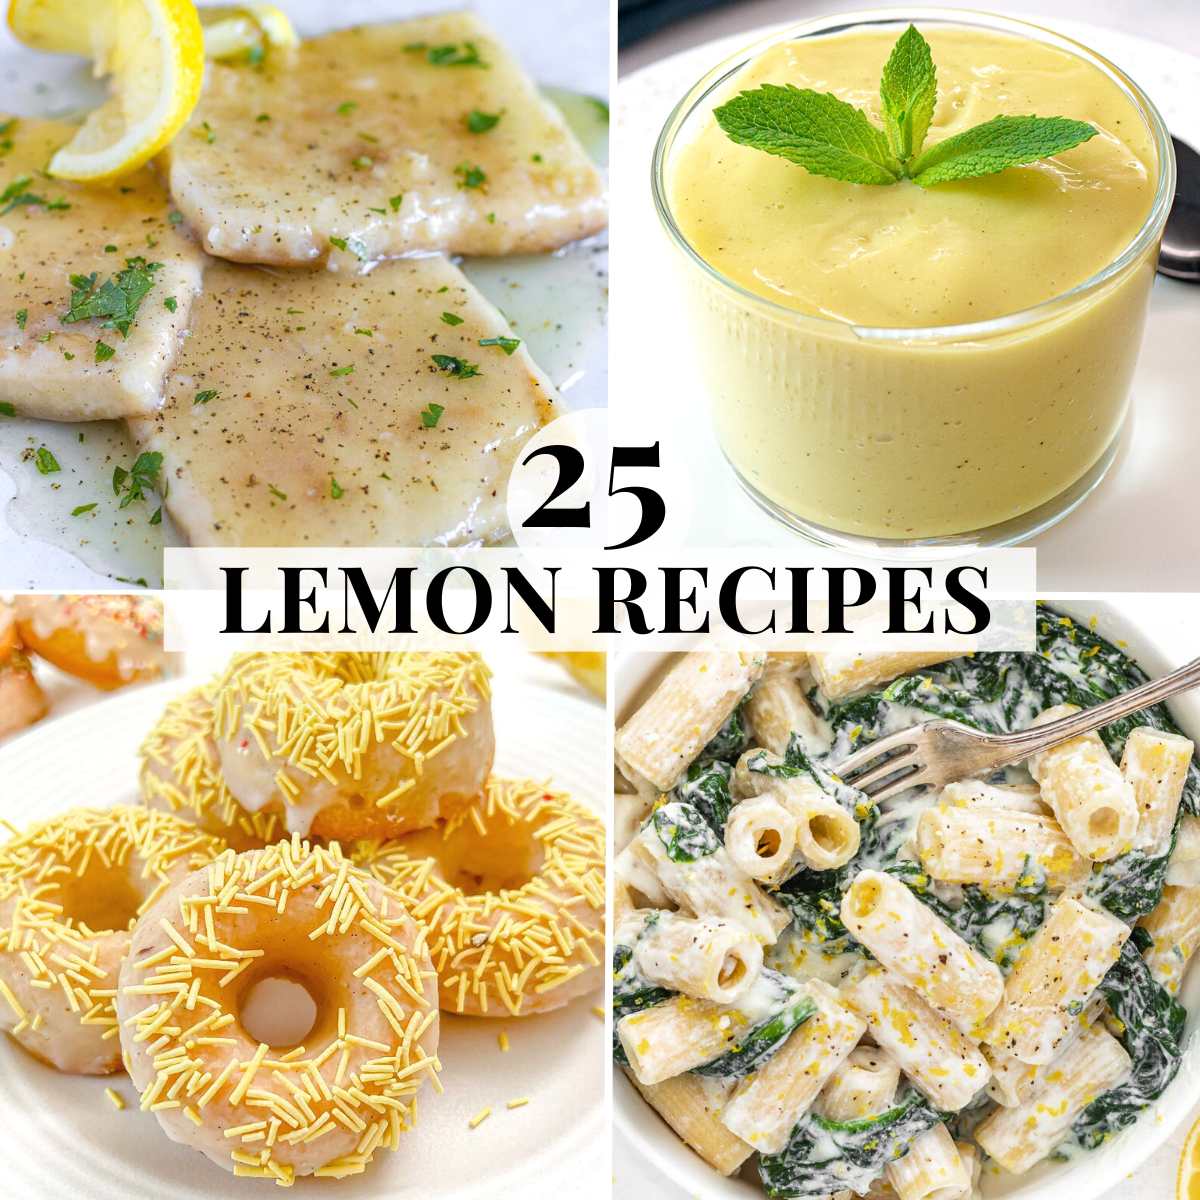 What to do with lemons - Healthy Food Guide